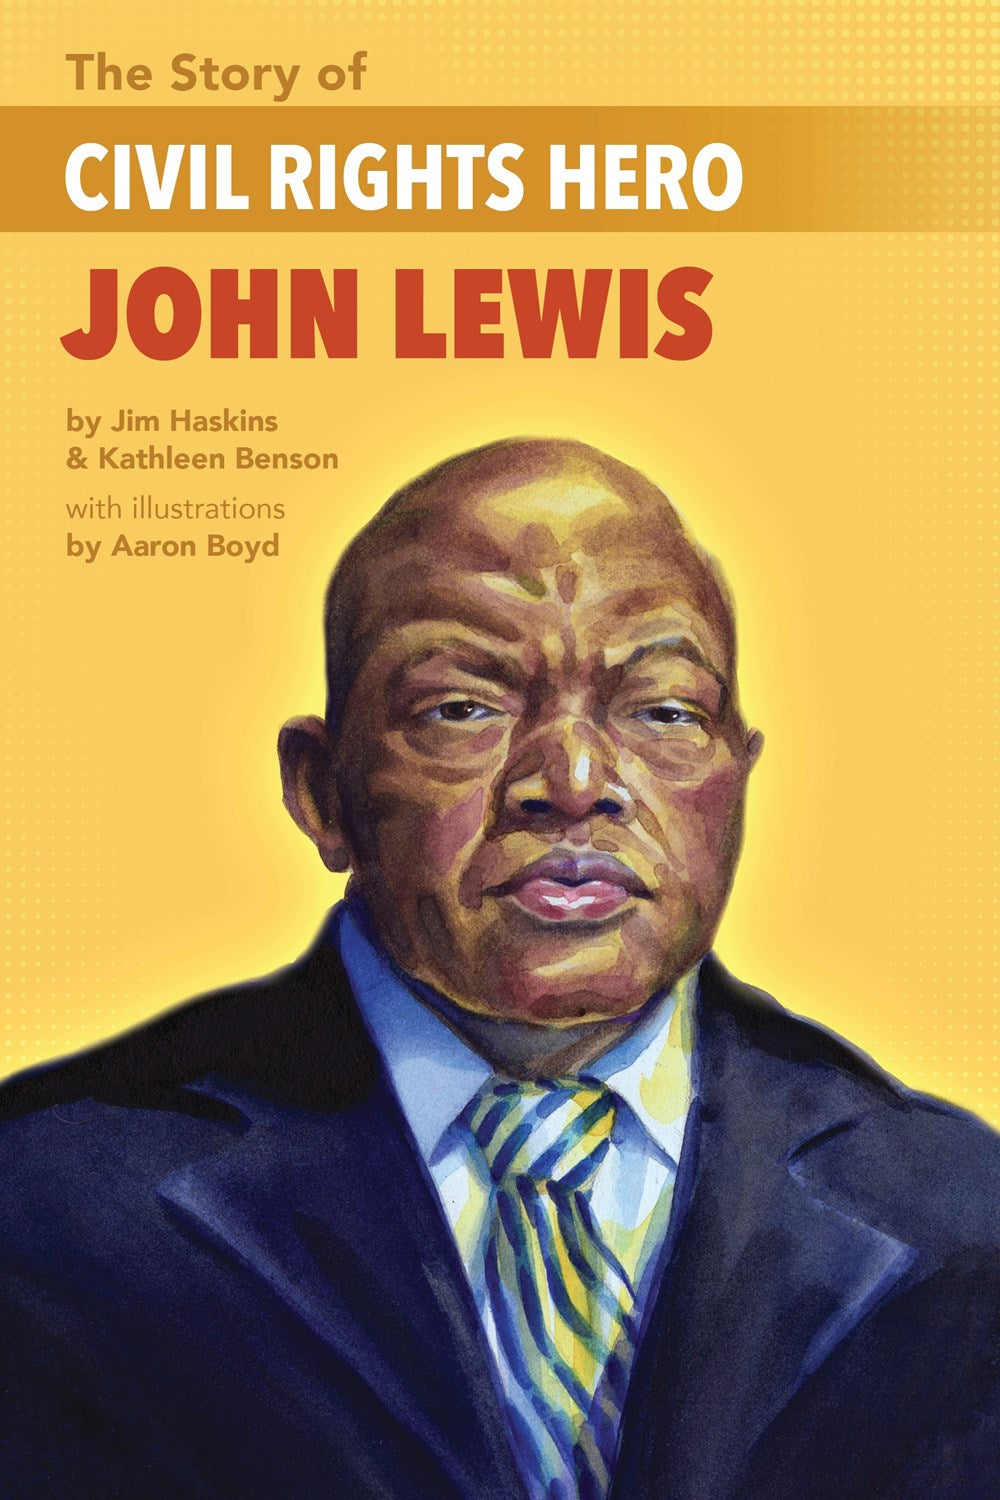 The Story of Civil Rights Hero John Lewis